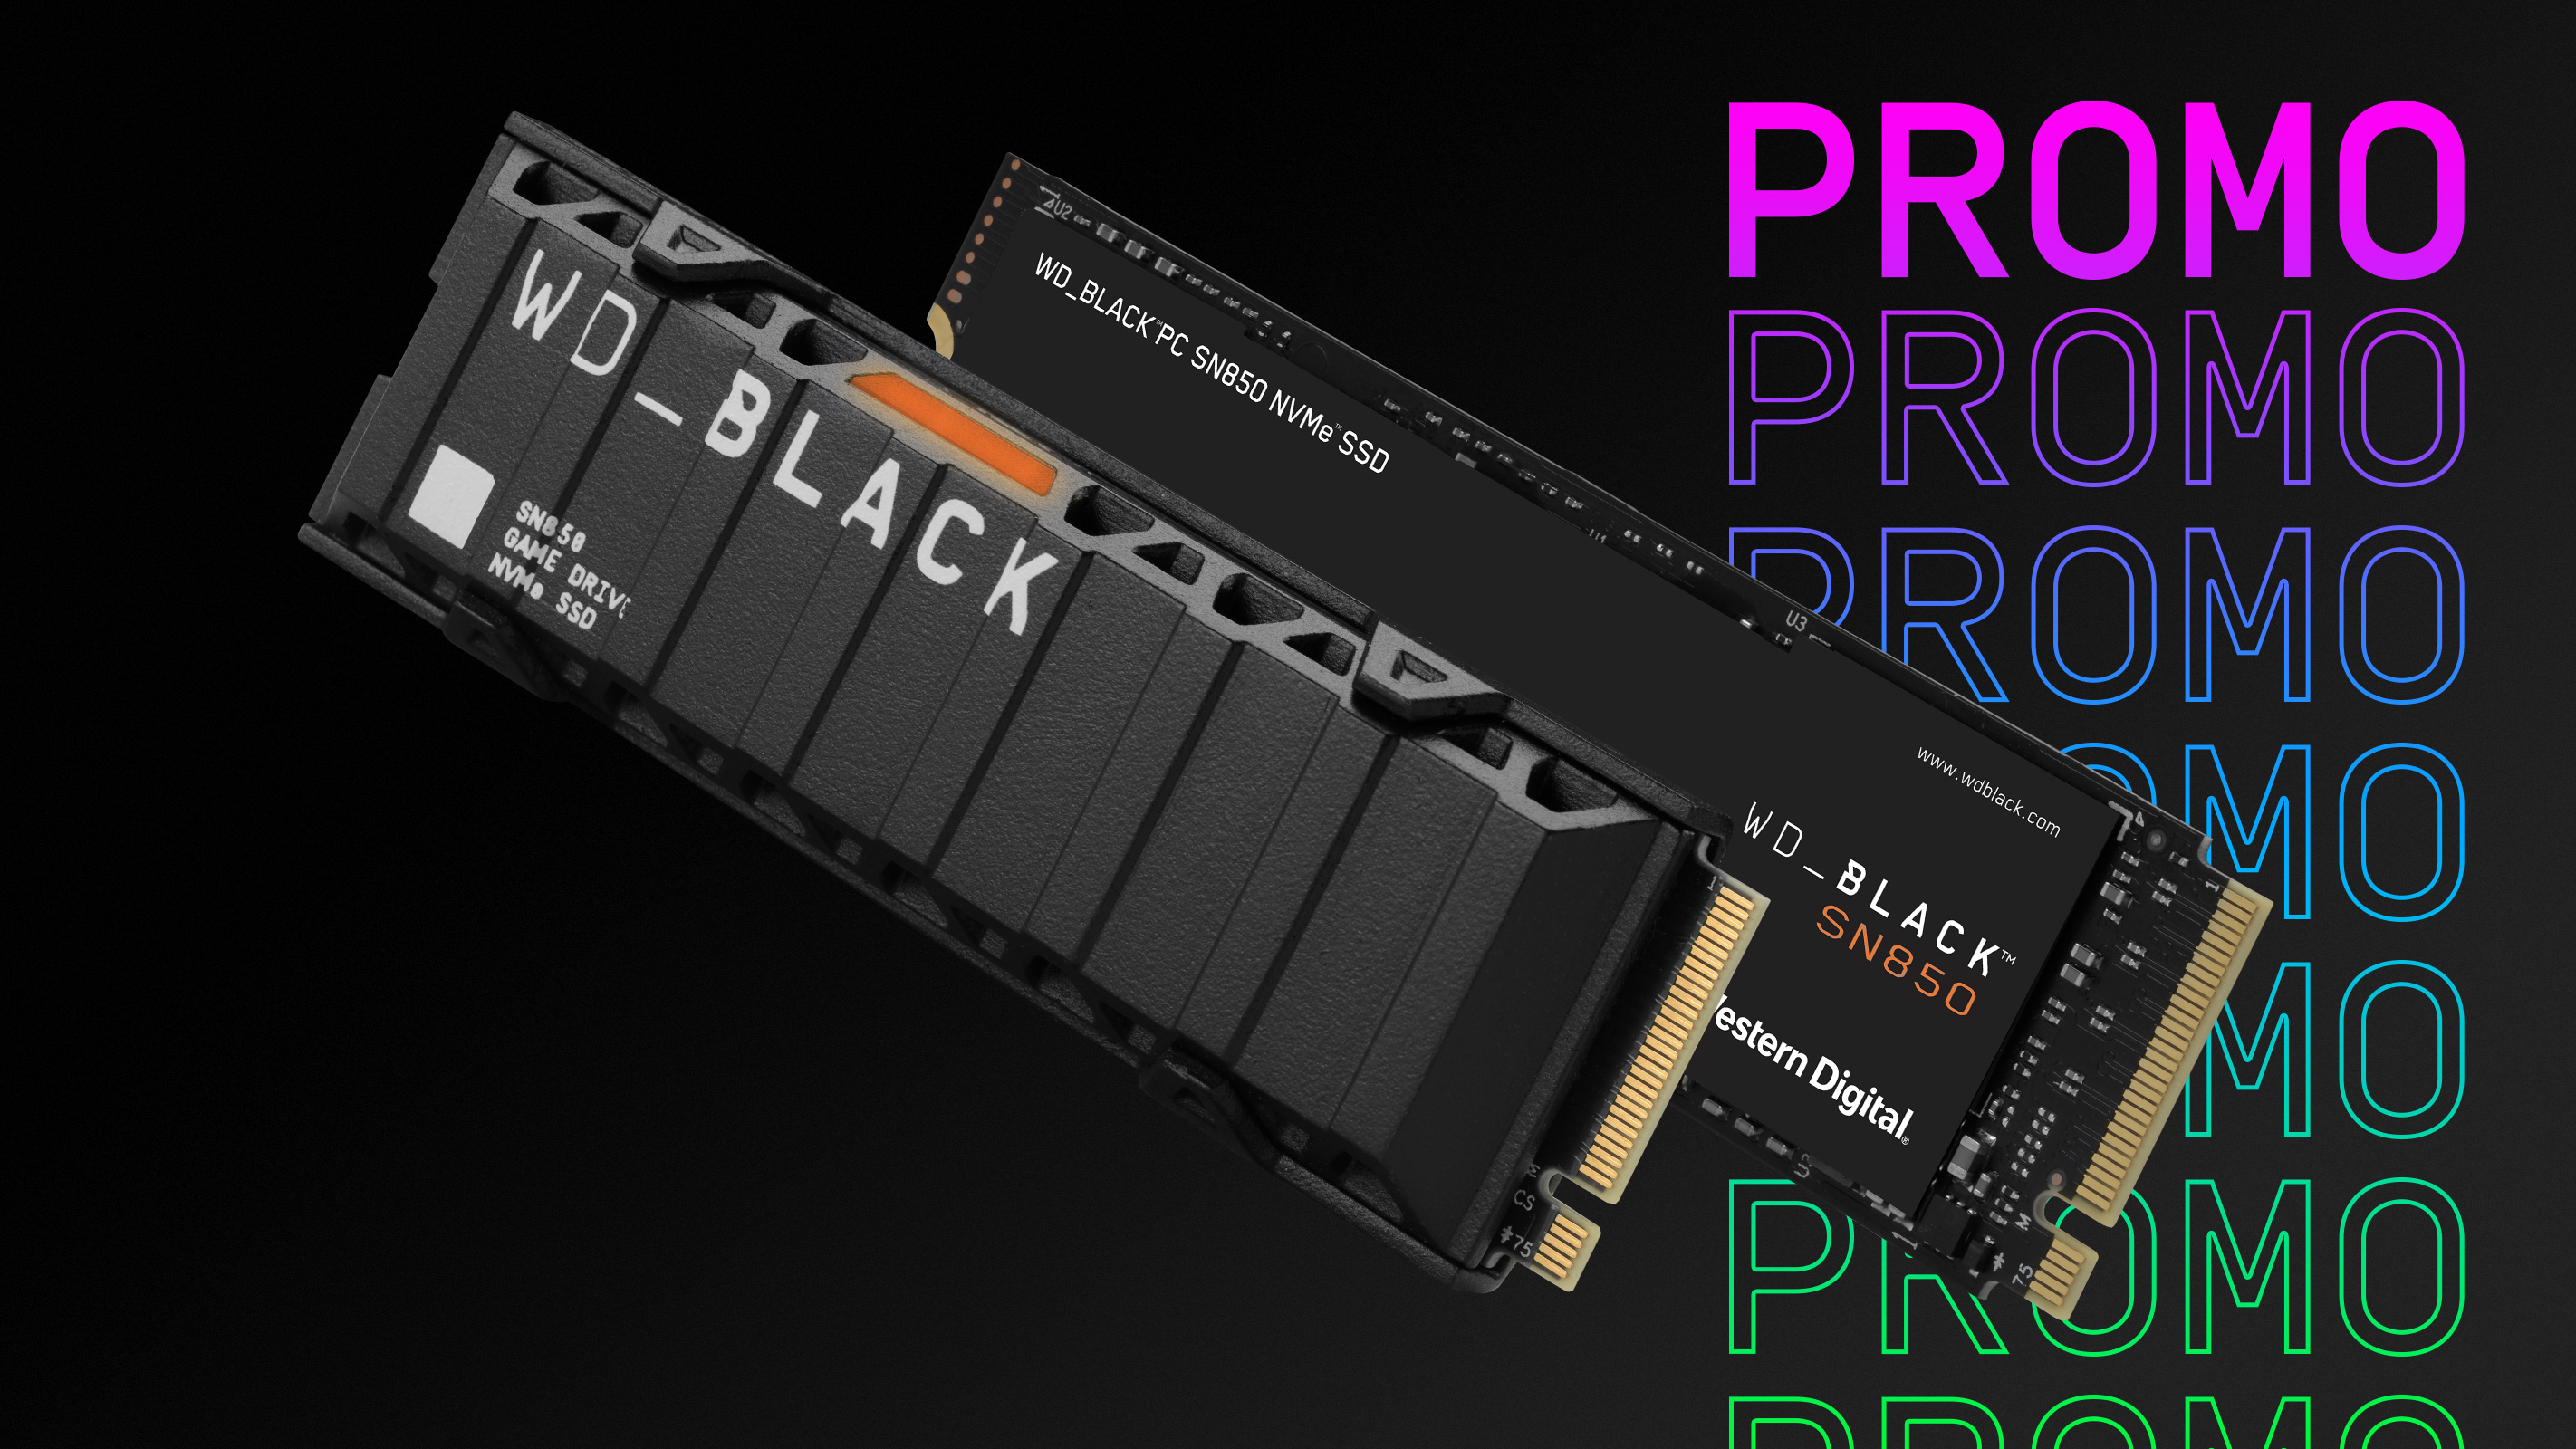 Wd Black Back In Stock Get Our 2tb Wdblack Sn850 Nvme Ssd W Heatsink Here T Co Jhrs4ngwvm While Supplies Last T Co 5cwzlwvzmf Twitter